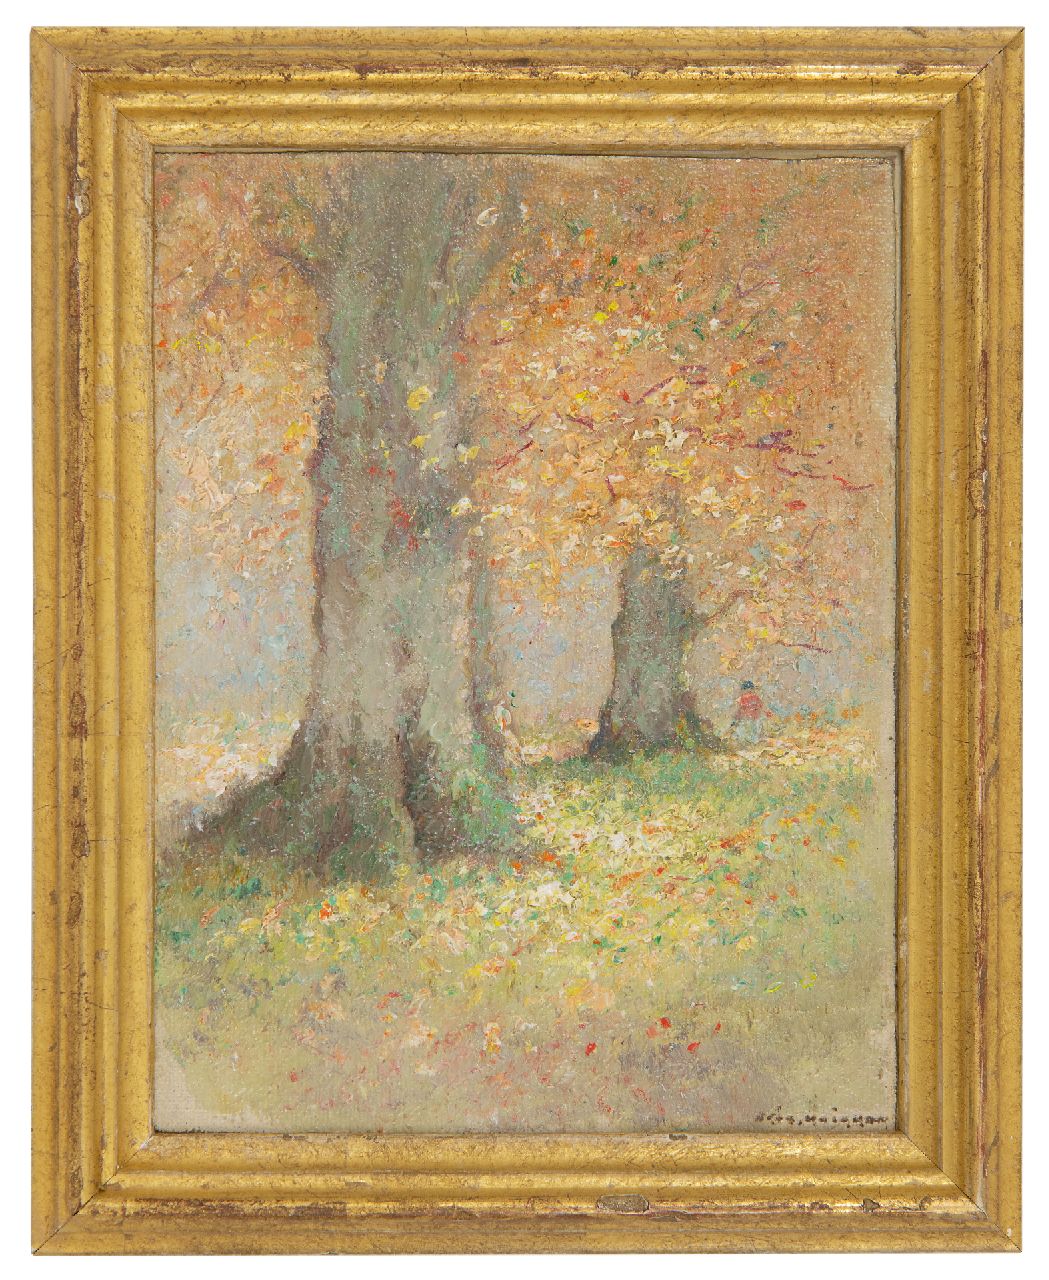 Knikker A.  | Aris Knikker | Paintings offered for sale | Beech in autumn, oil on canvas laid down on board 15.4 x 11.6 cm, signed l.r.